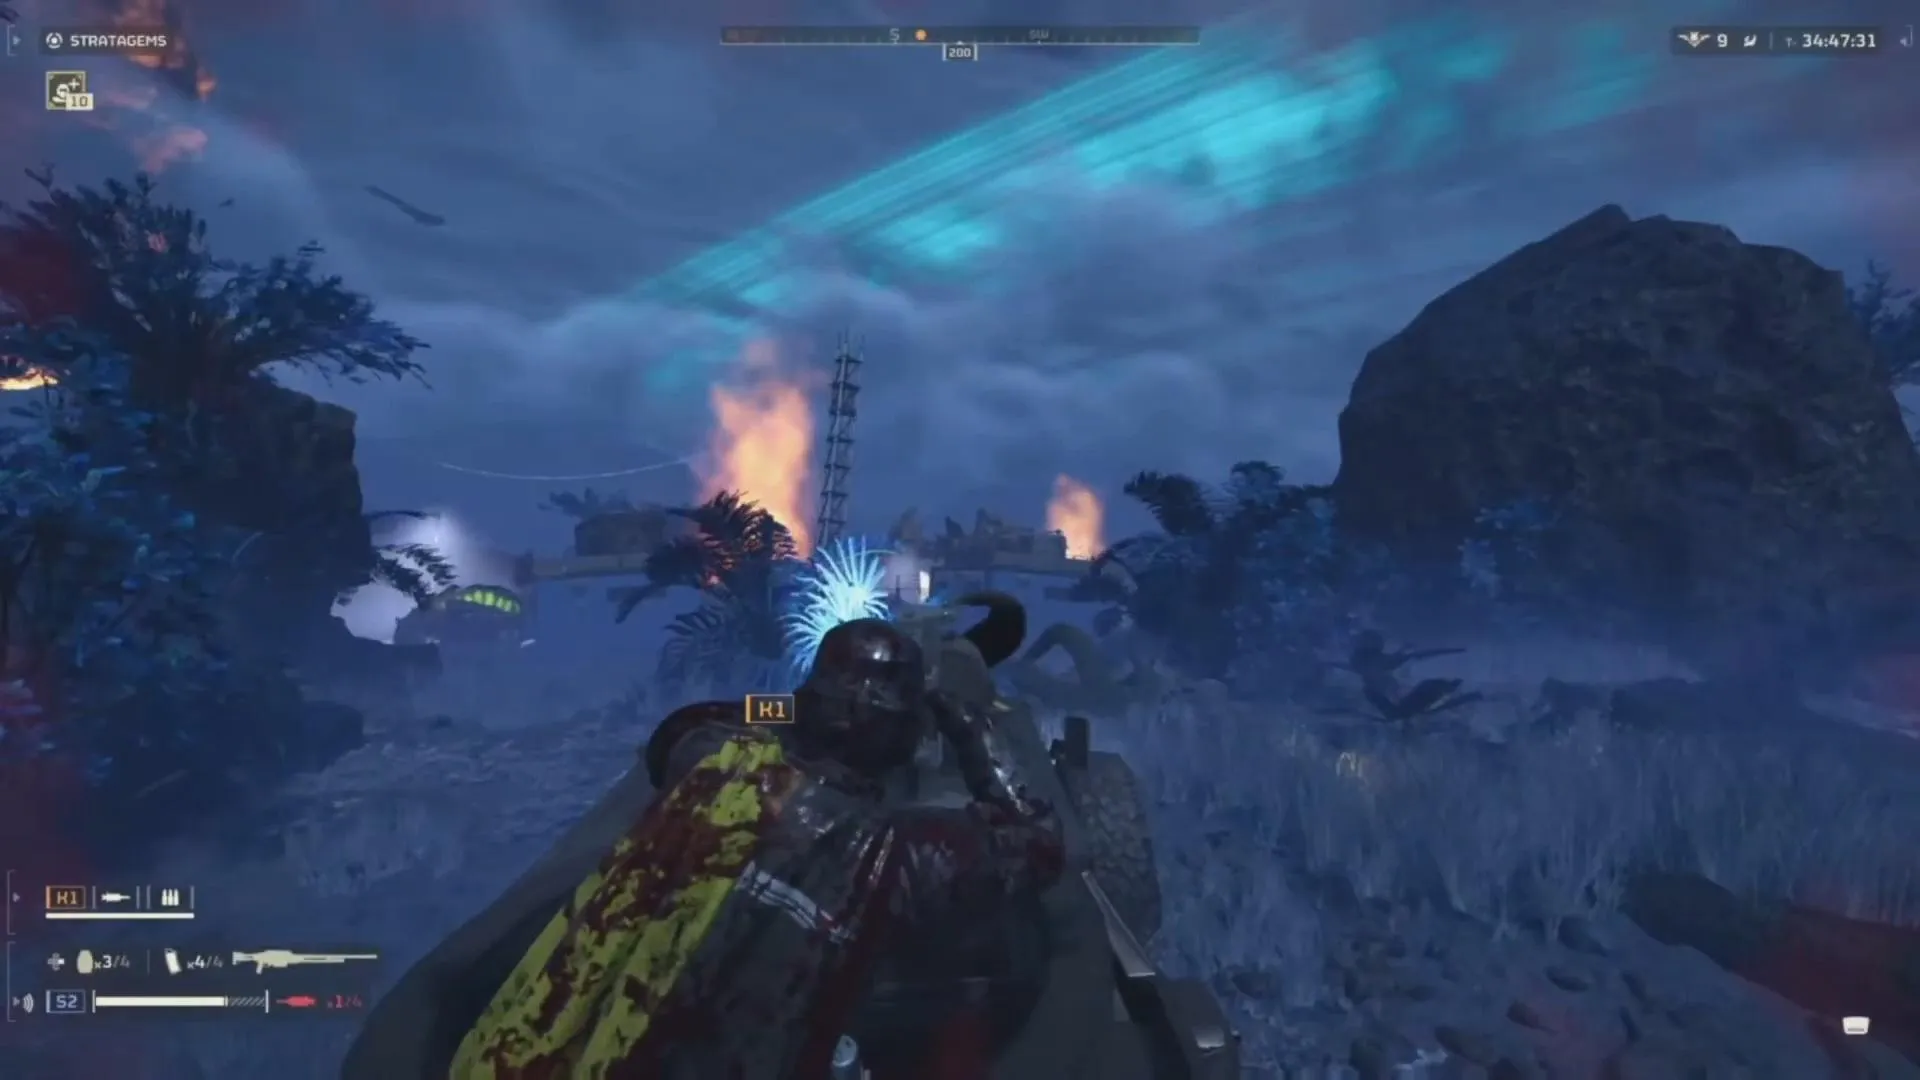 New Vehicles and Mechs Leaks in Helldivers 2